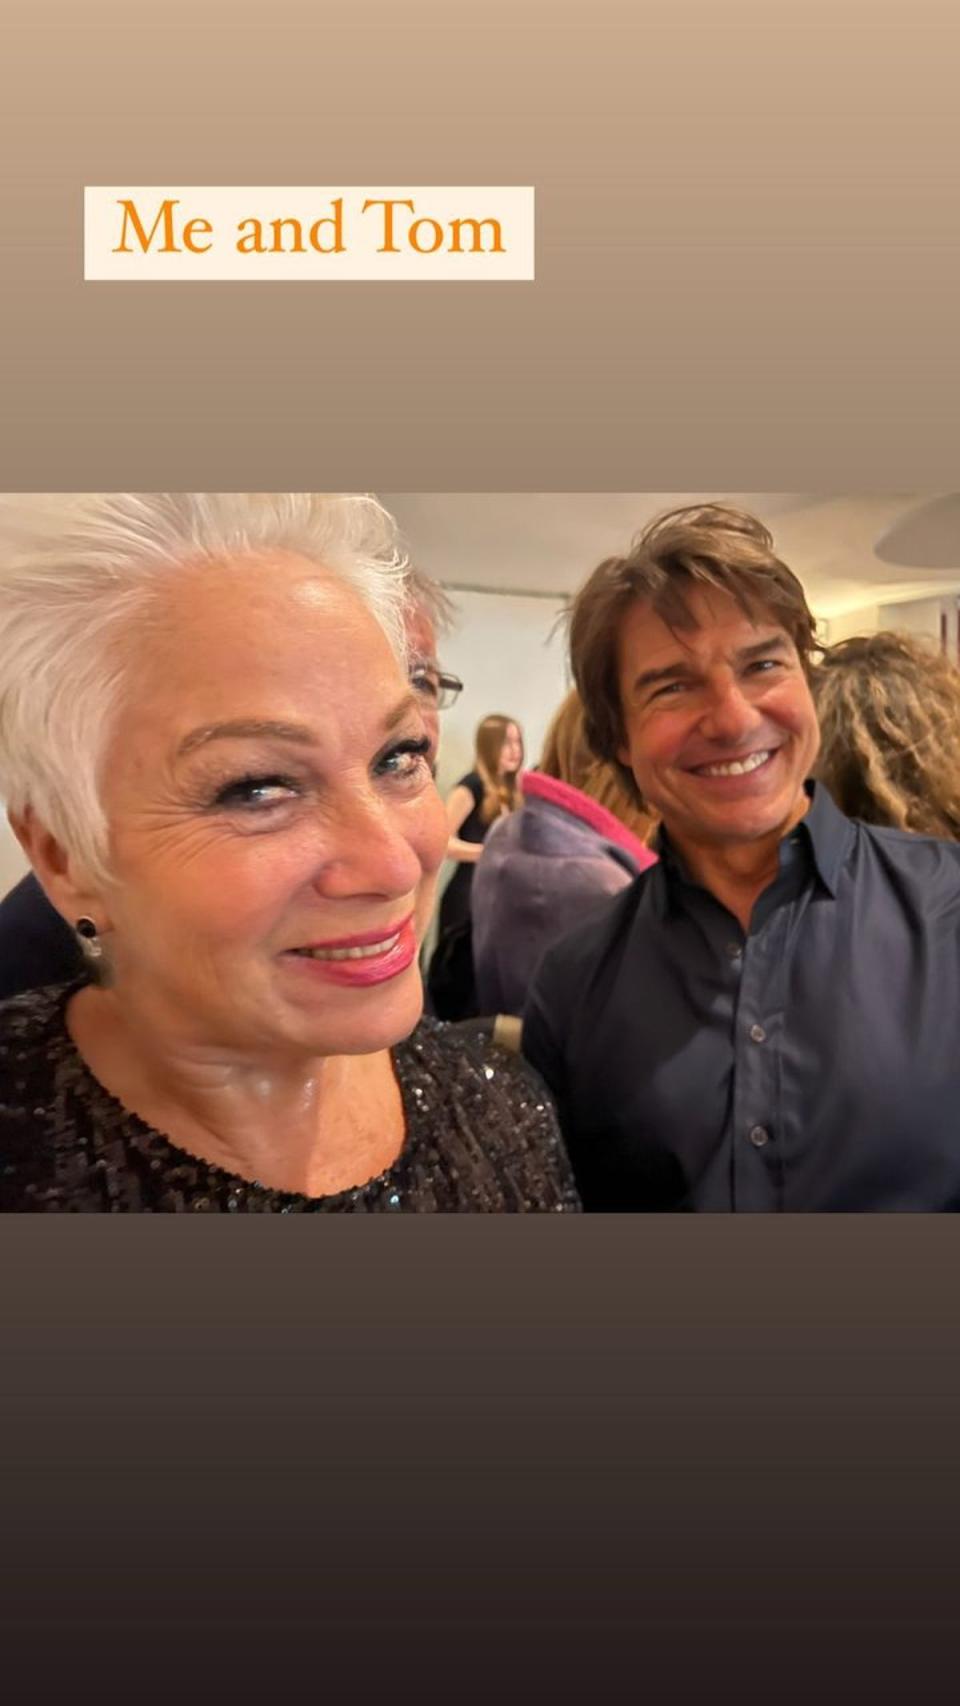 Denise Welch and Tom Cruise (Denise Welch/Instagram)